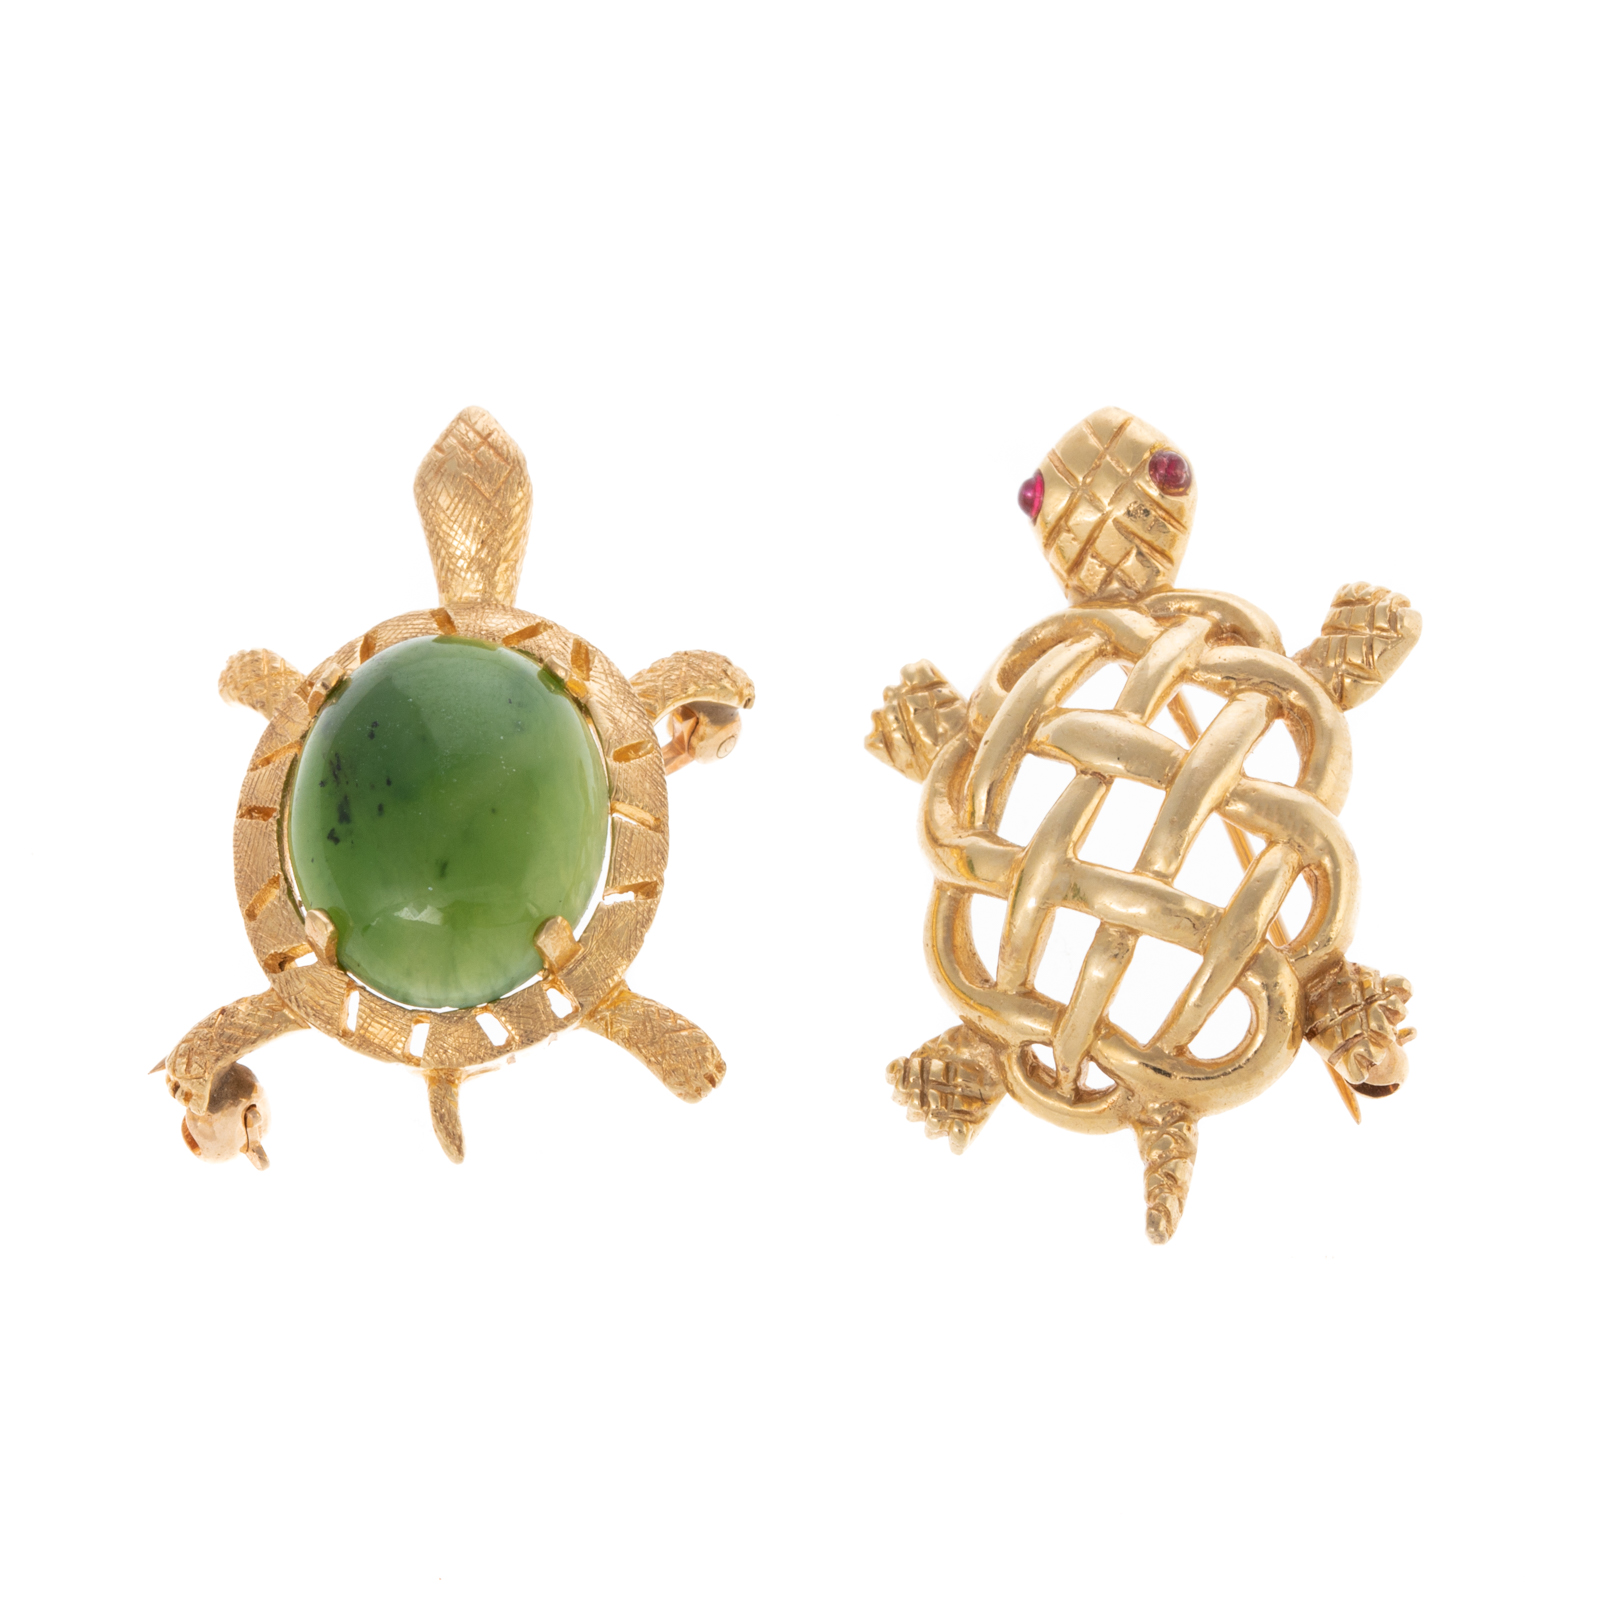 A PAIR OF TURTLE PINS IN 14K YELLOW